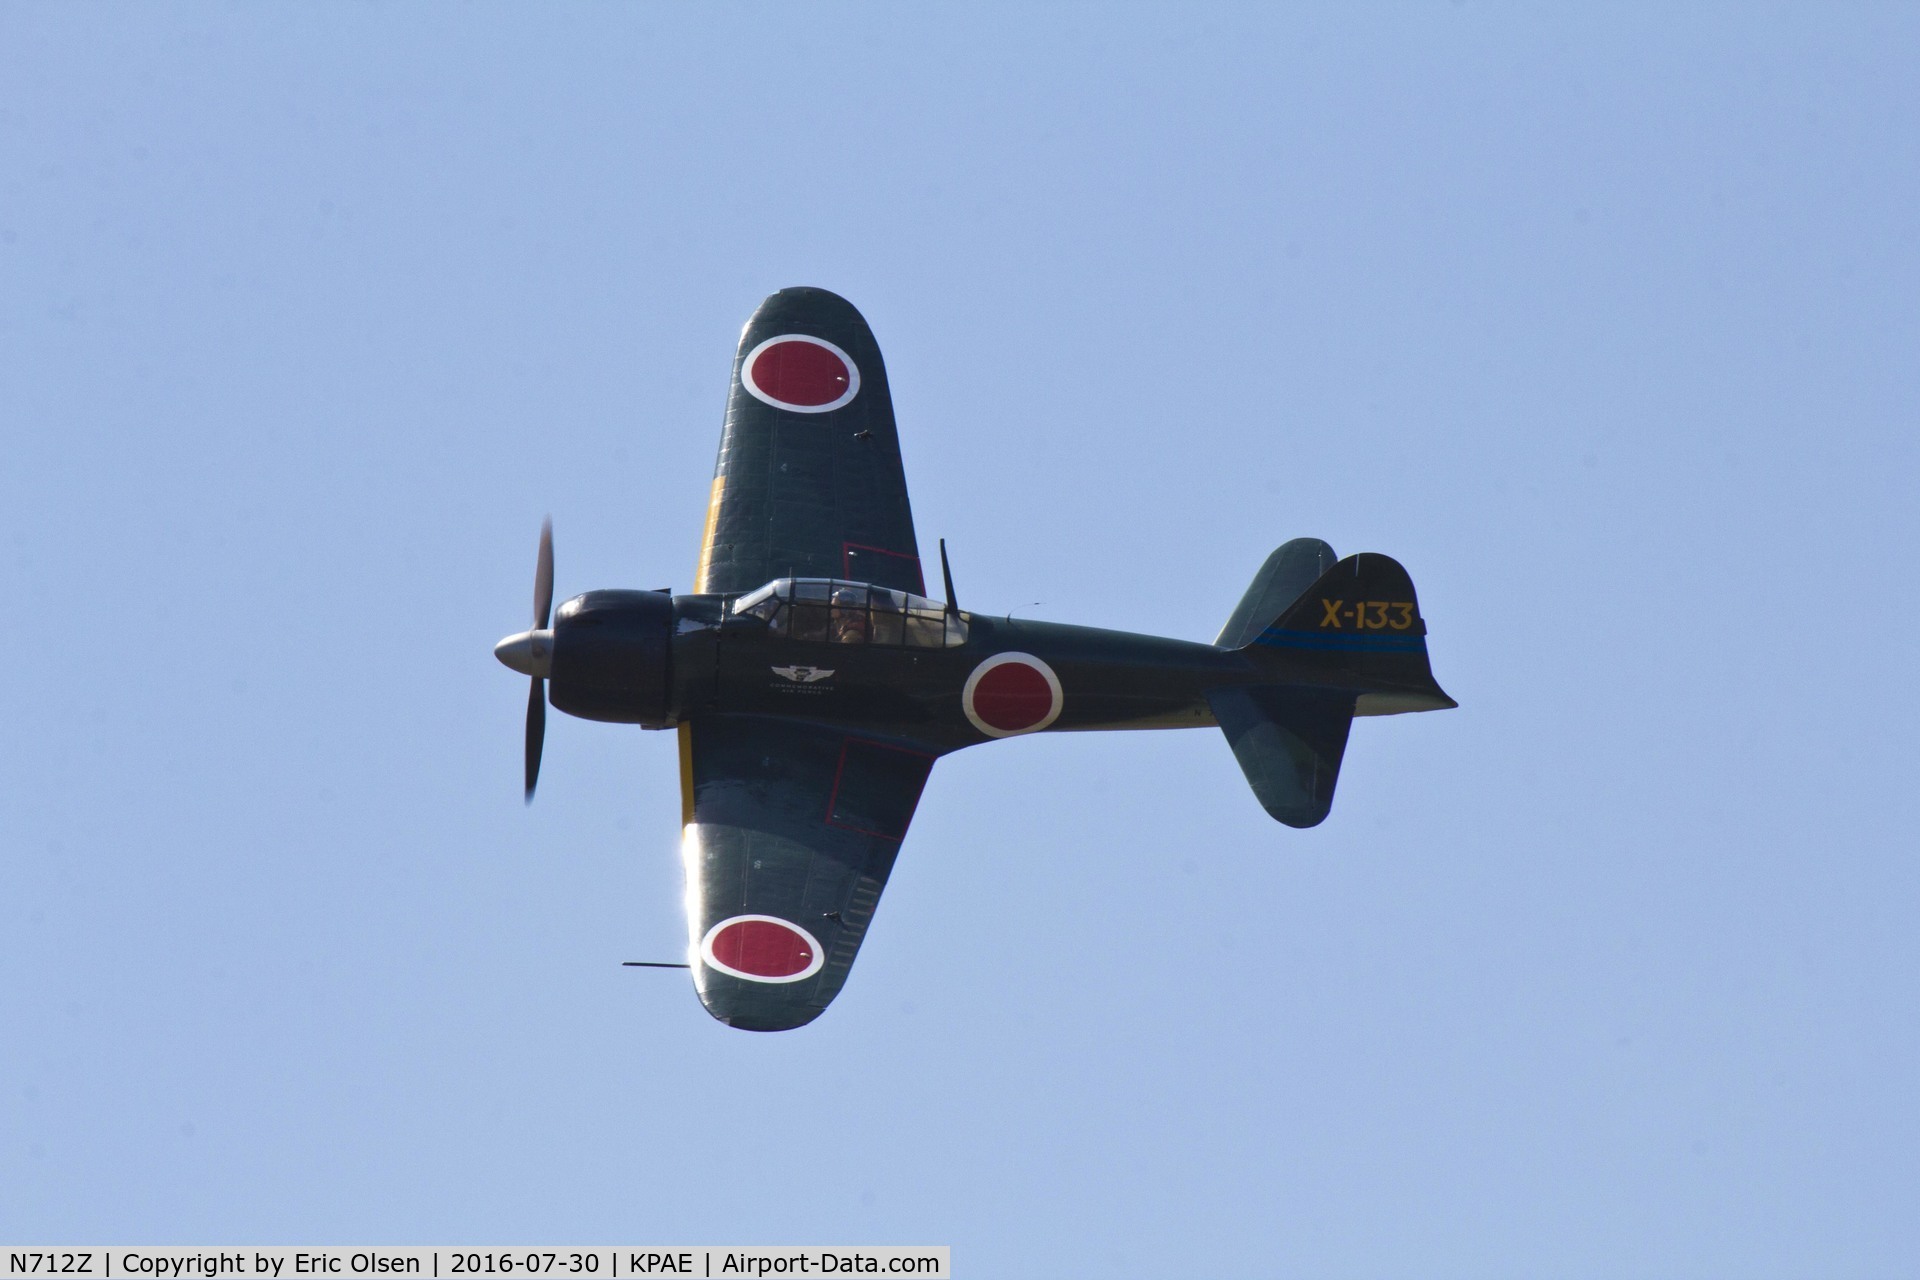 N712Z, 1942 Mitsubishi A6M3 Reisen (Zero) C/N 3869, A6M3 Zero during one of it's many passes during the 2016 FHC Skyfair.